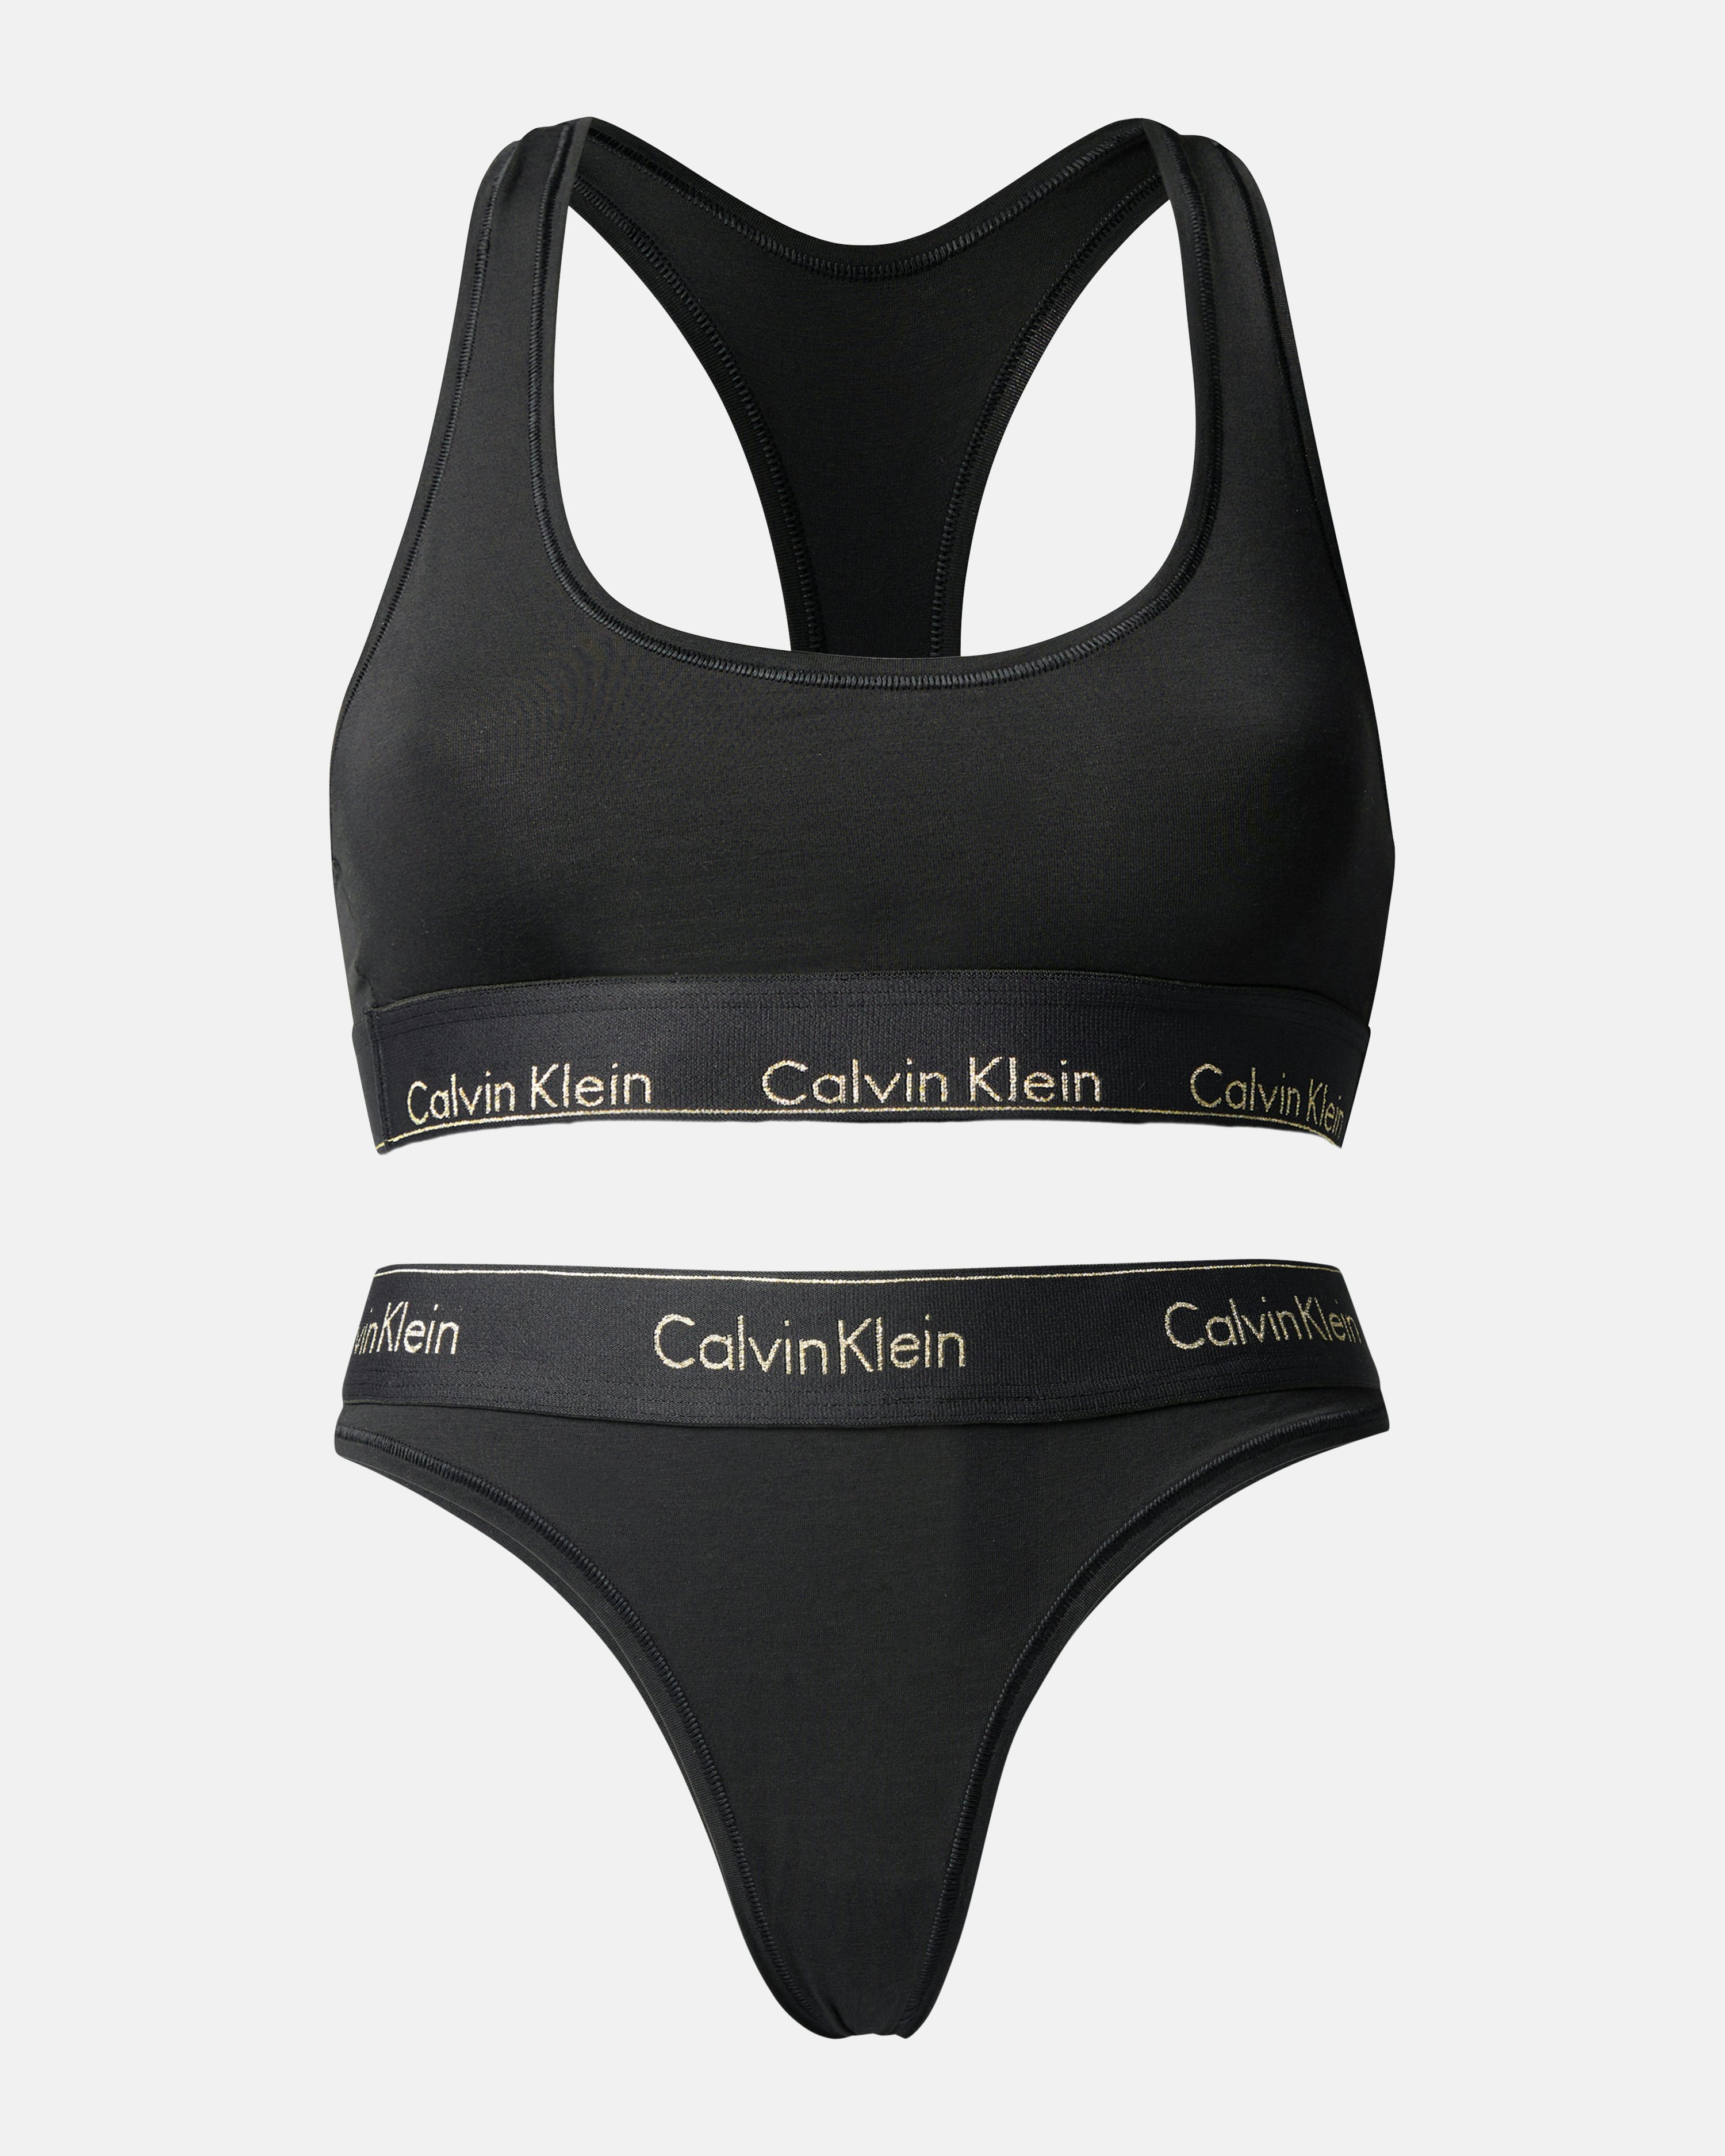 Calvin Klein Pack of 2 Bralette bras grey, black - ESD Store fashion,  footwear and accessories - best brands shoes and designer shoes